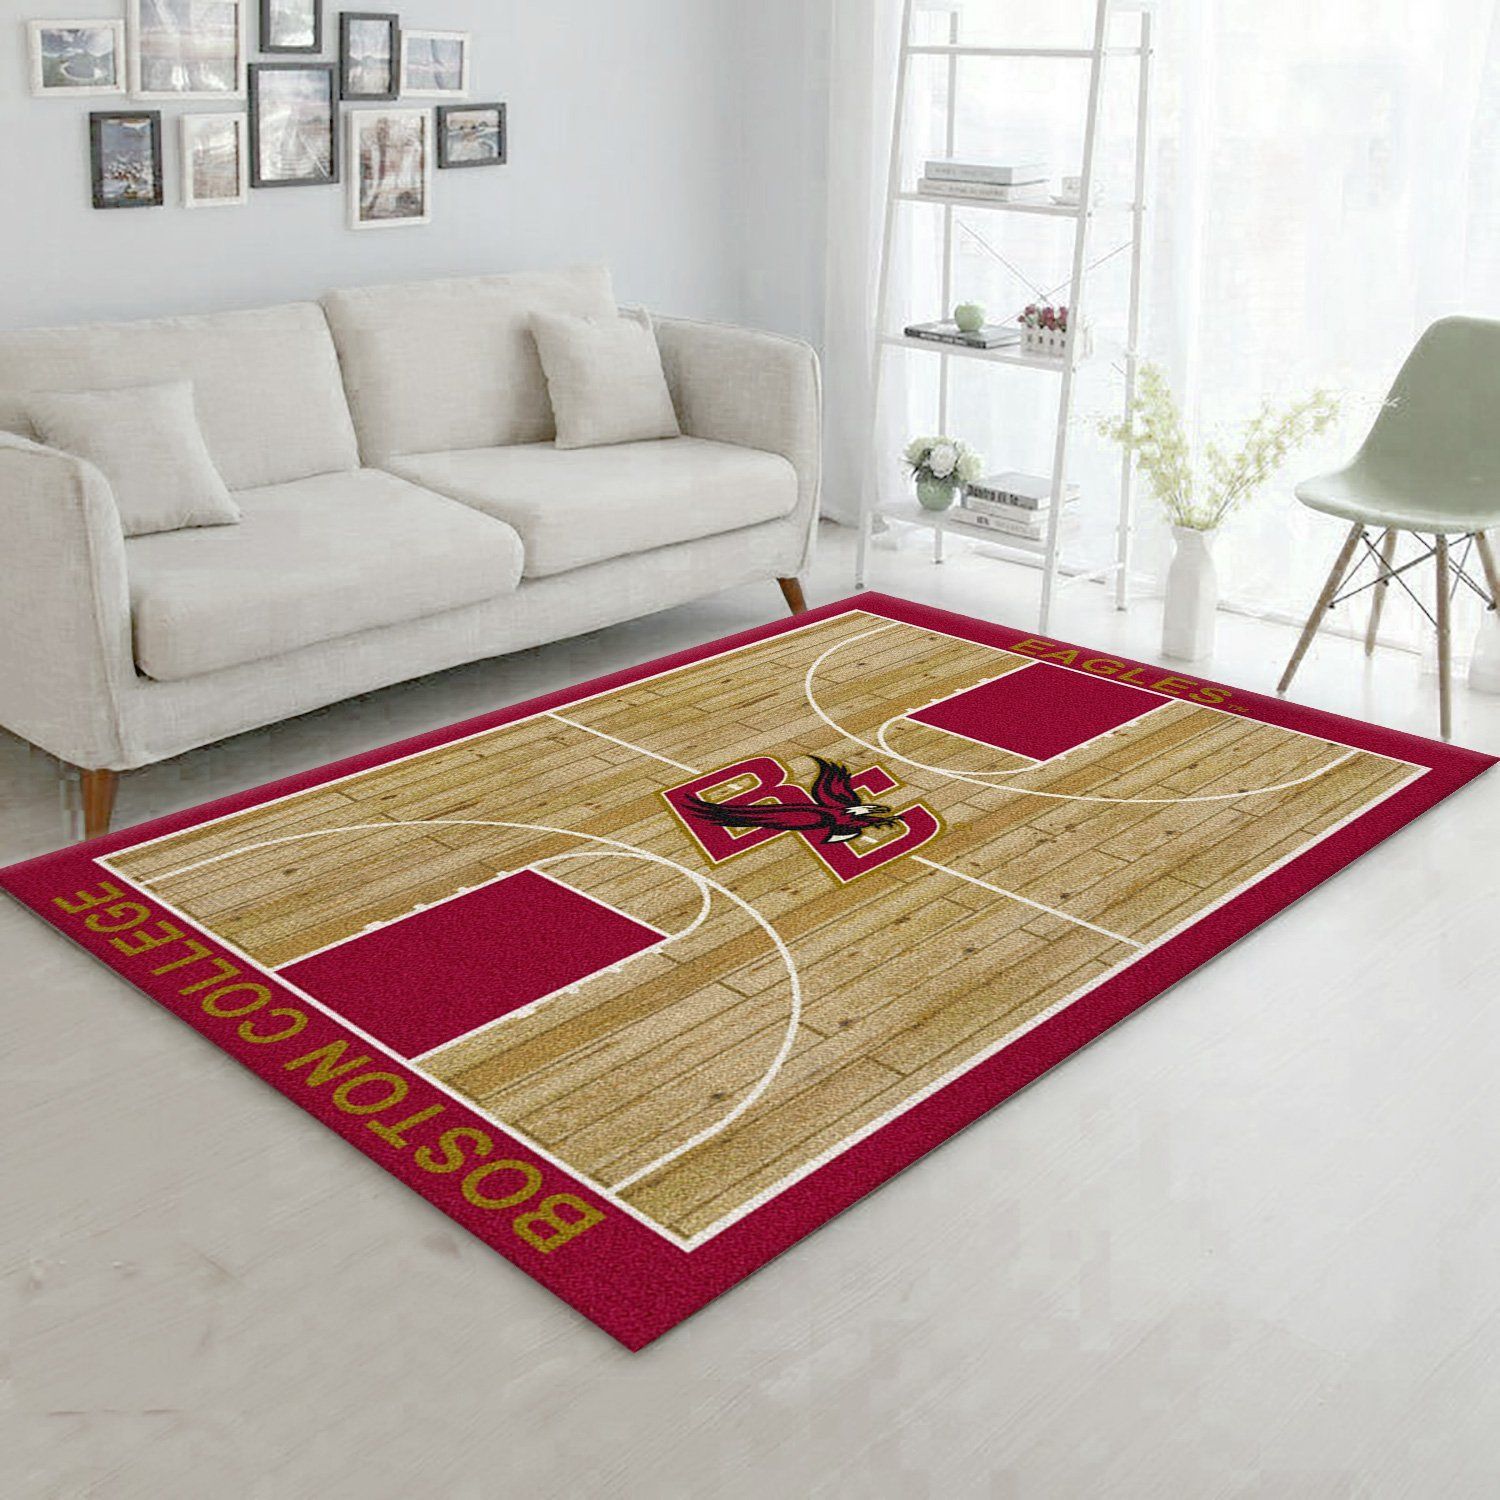 College Home Court Boston College Basketball Team Logo Area Rug, Bedroom Rug, Home US Decor - Indoor Outdoor Rugs 2